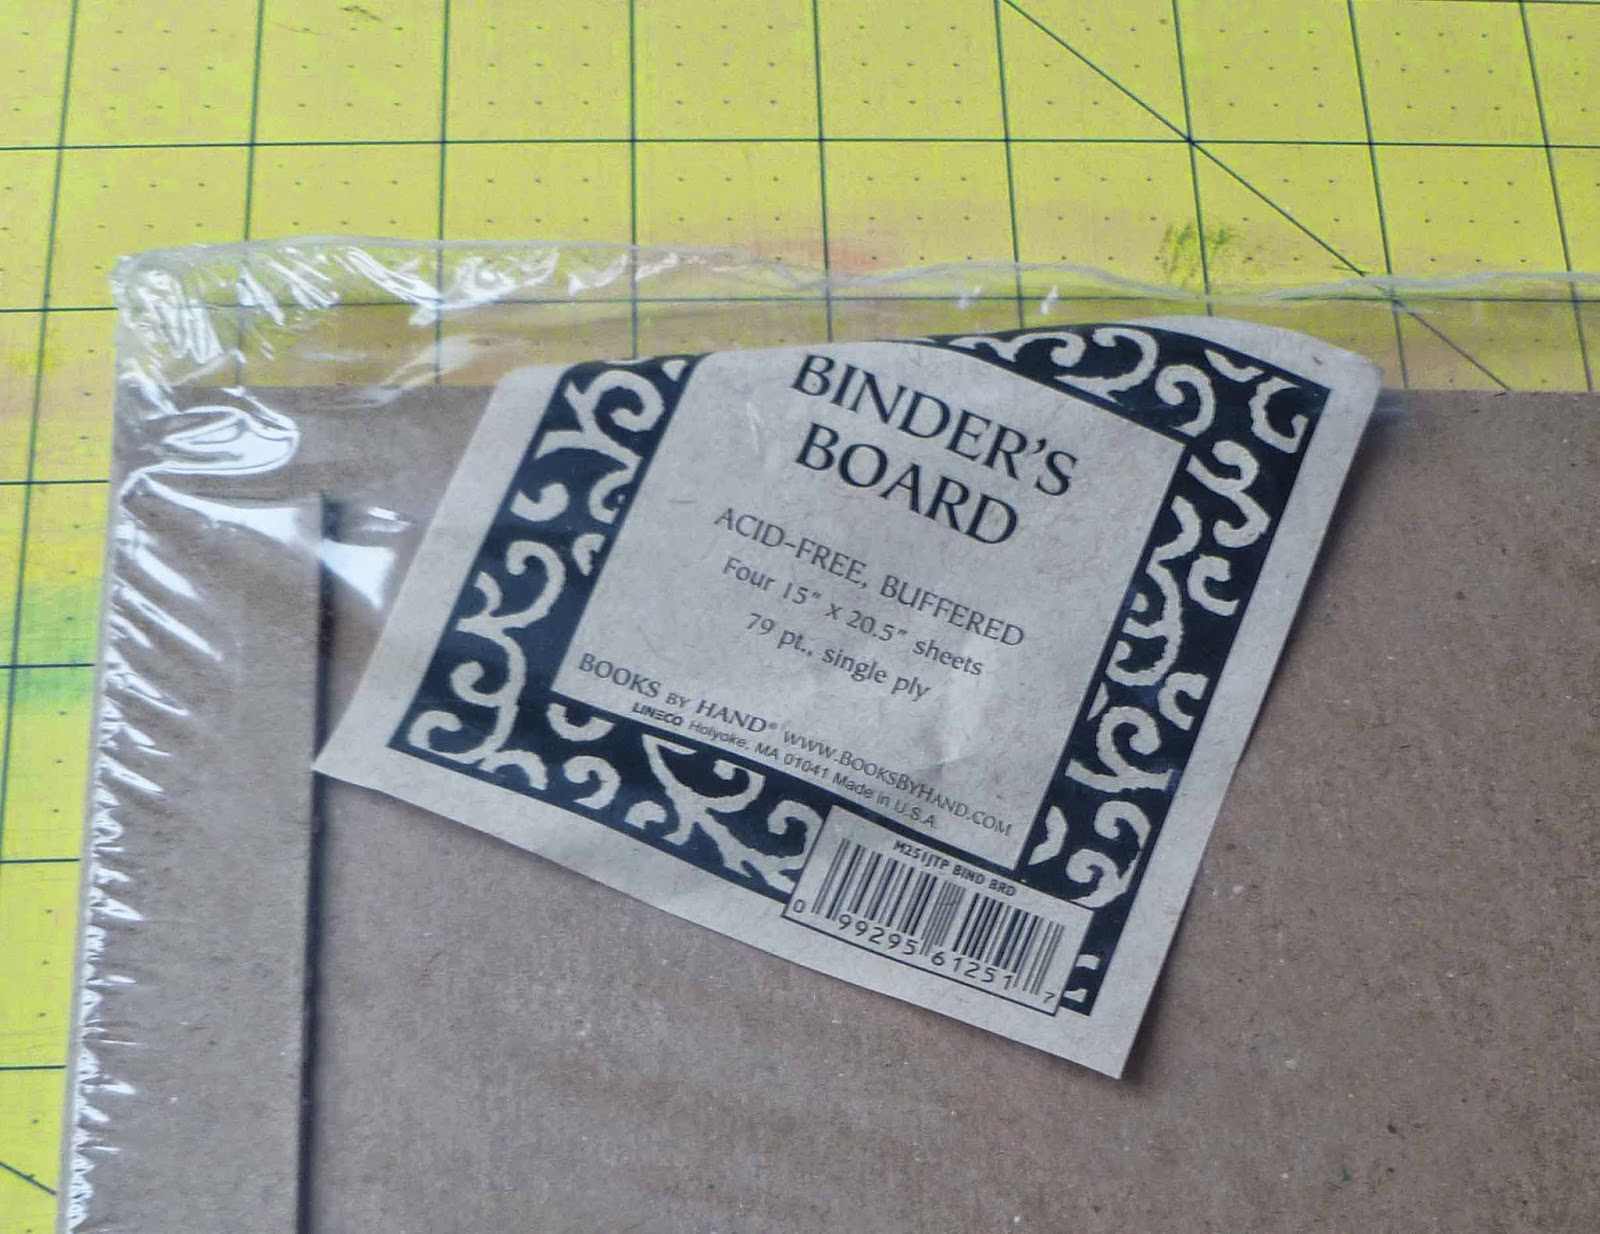 Books By Hand, 14.5 x 20.5 inch Binders Board, Acid-Free, for Book and  Bookbinding, Pack of 4